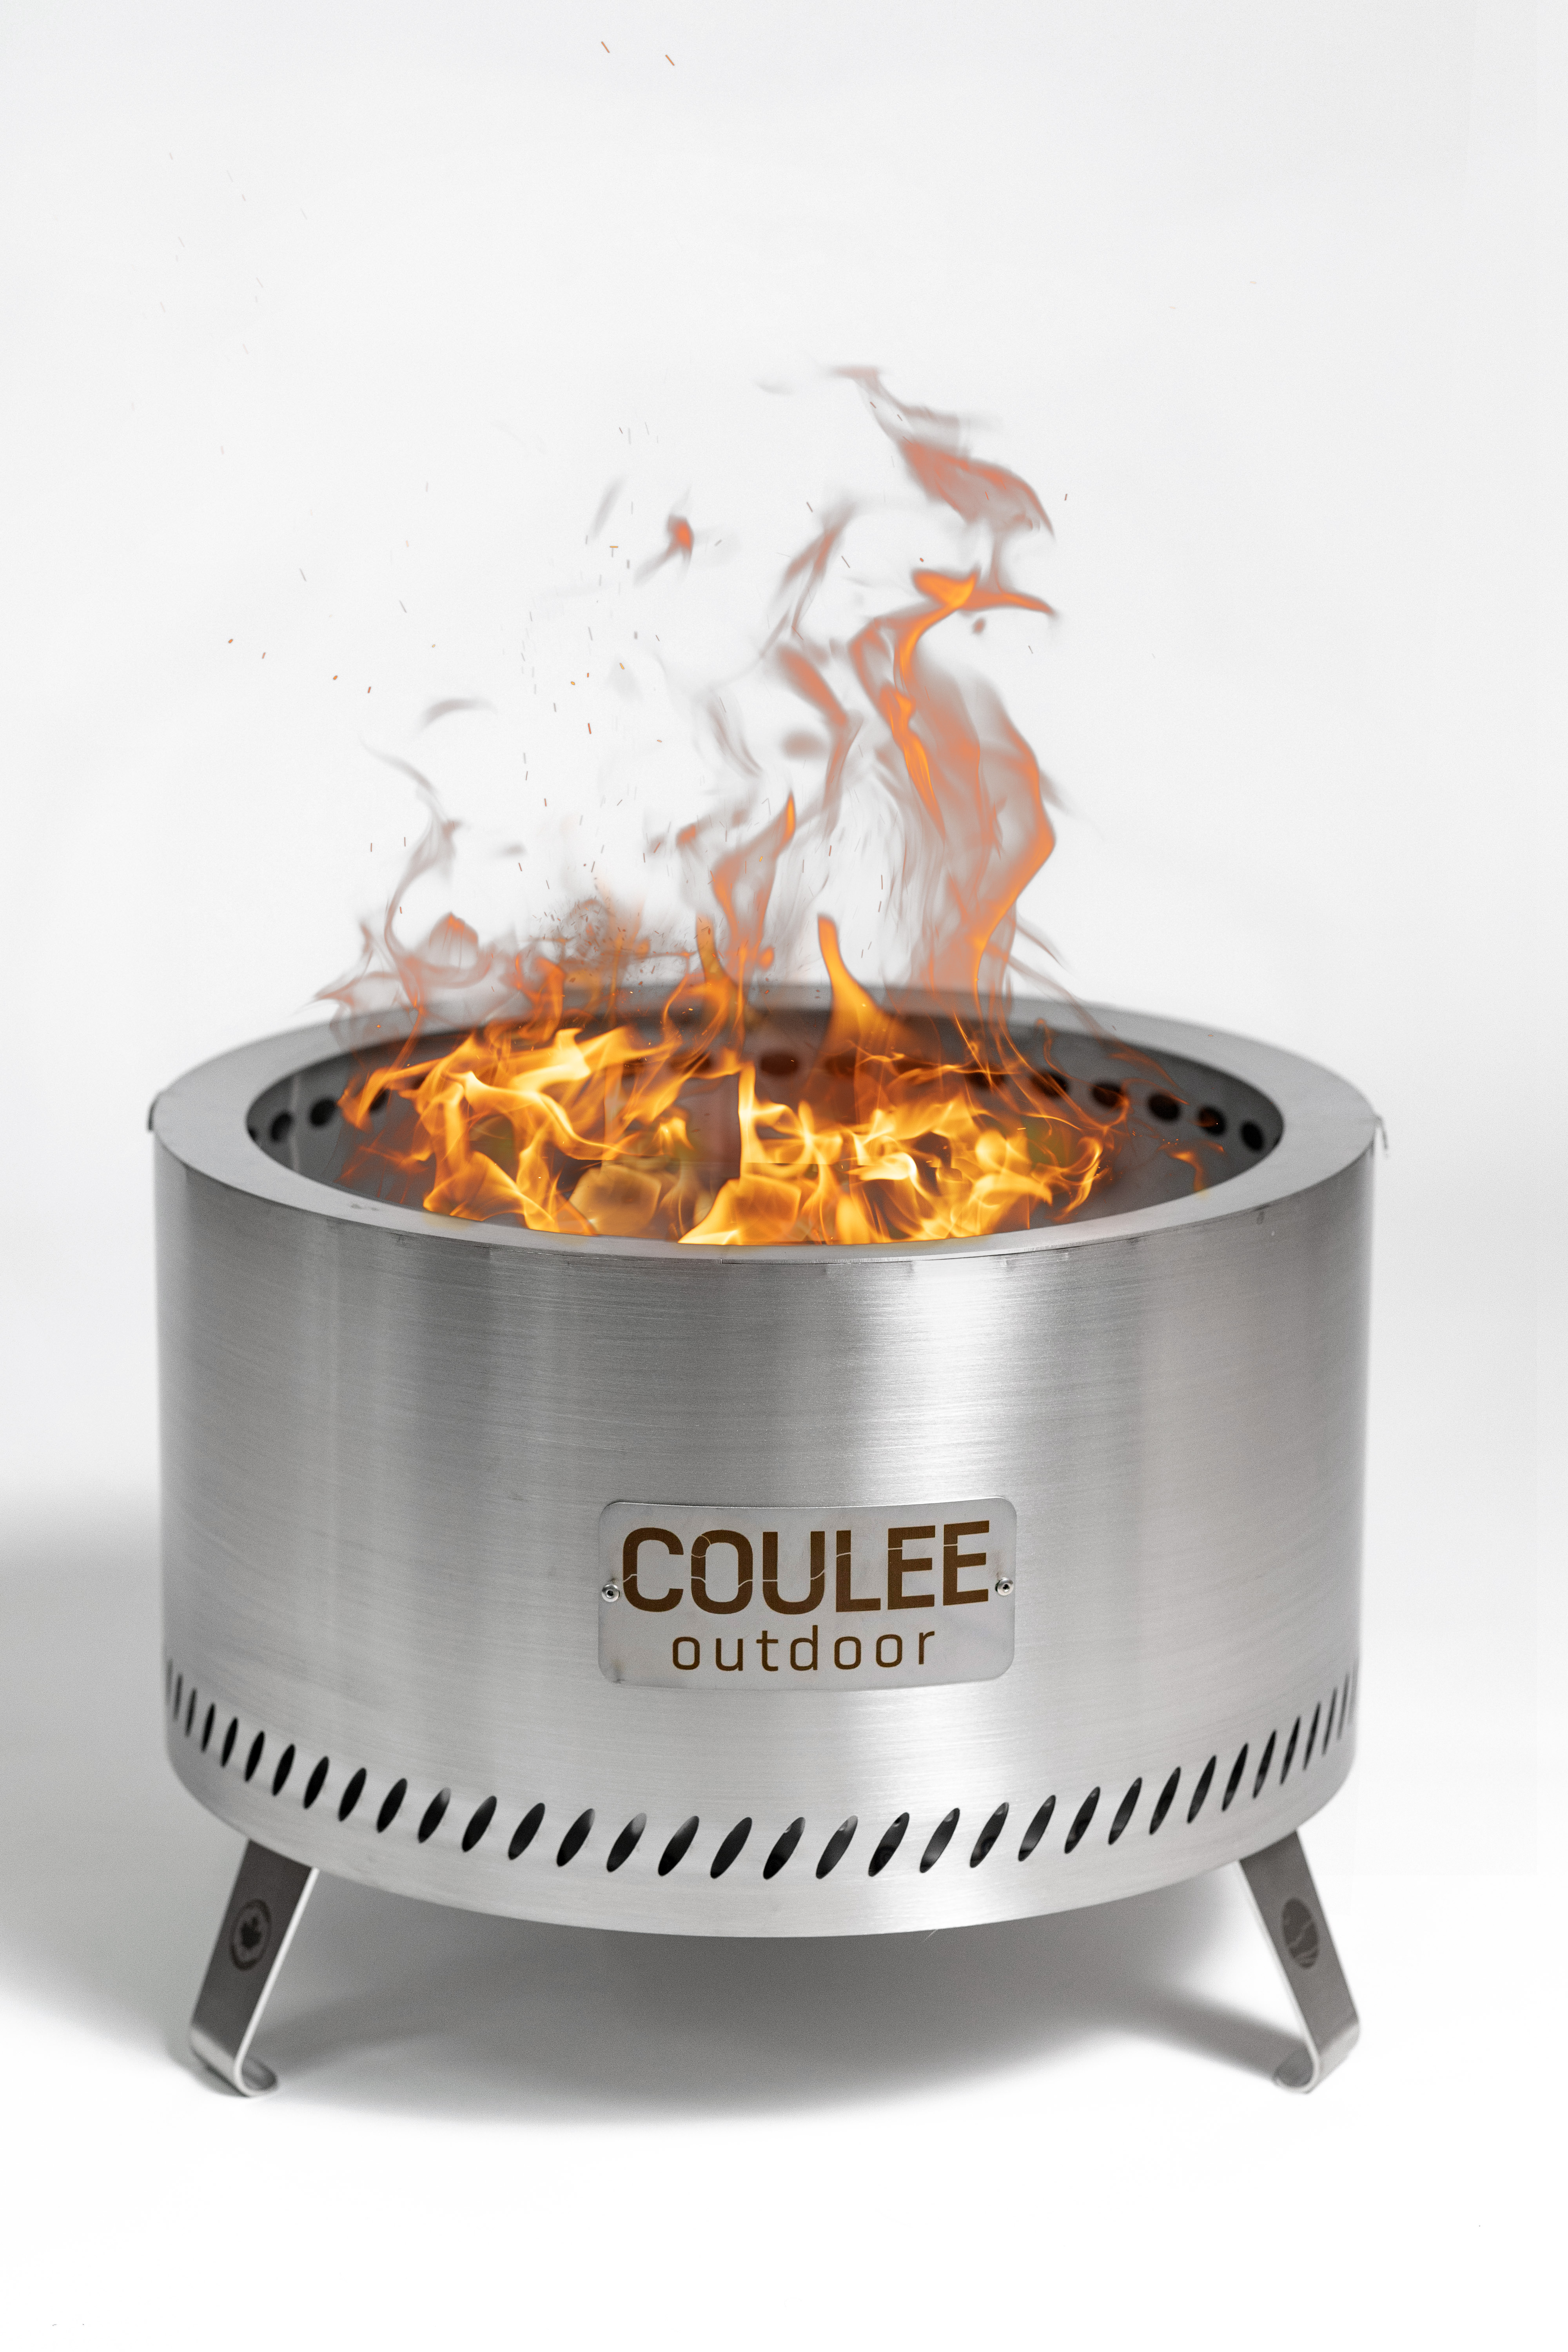 CouleeGo Smokeless Fire Pit